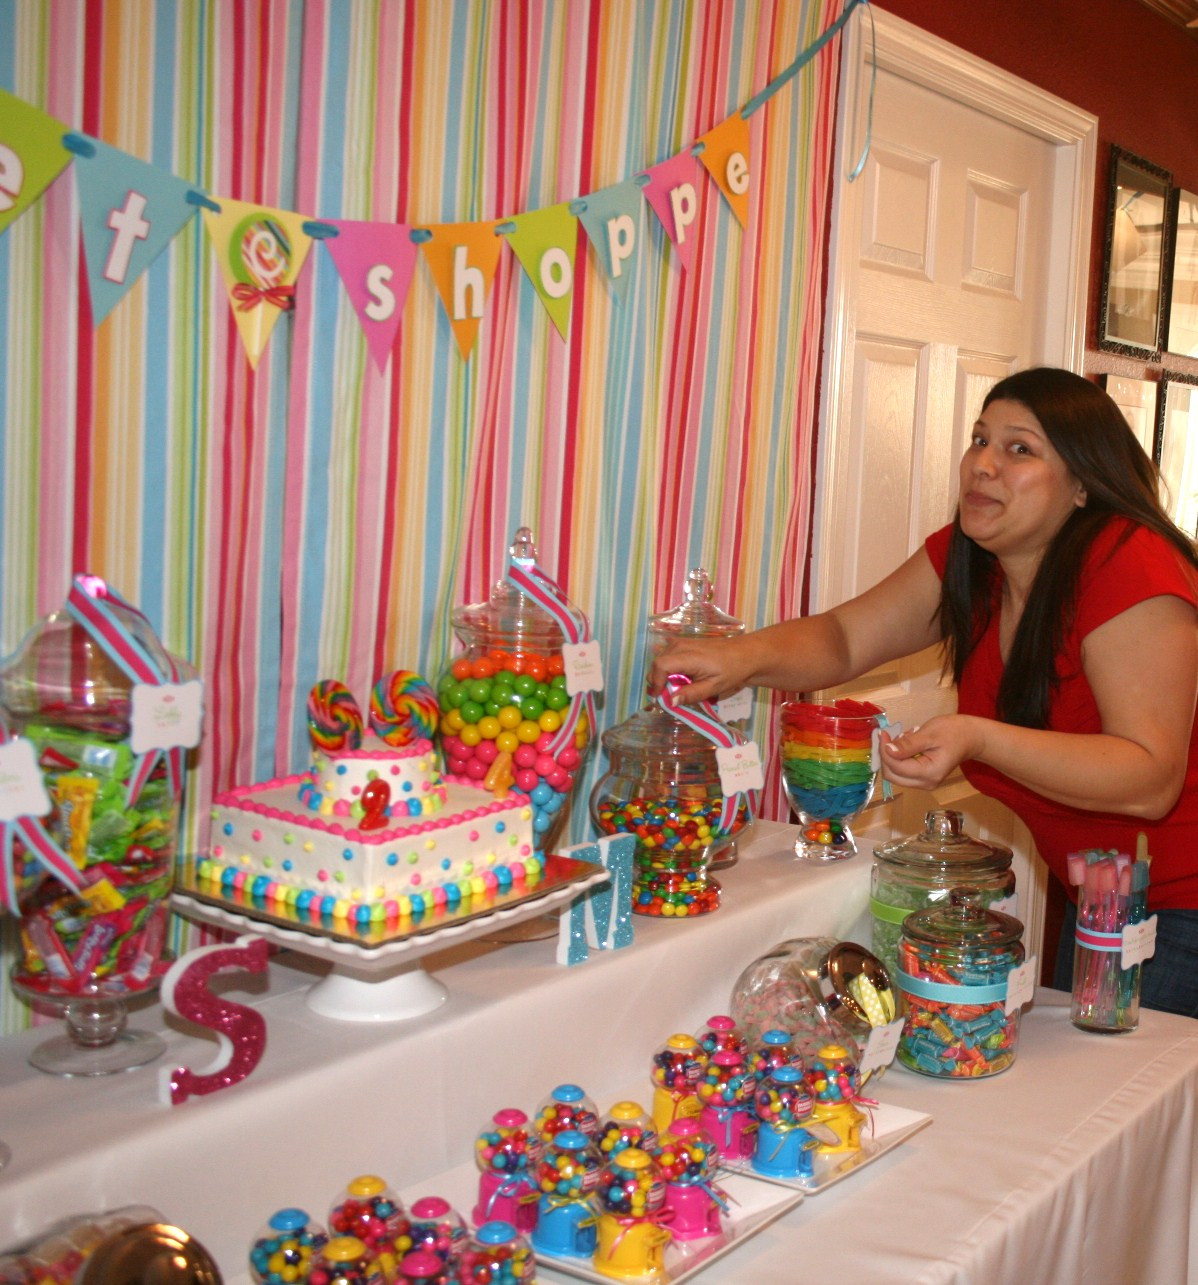 Candyland Birthday Party Ideas
 My Two Cupcakes Sienna & Mateo s Candyland Birthday Party